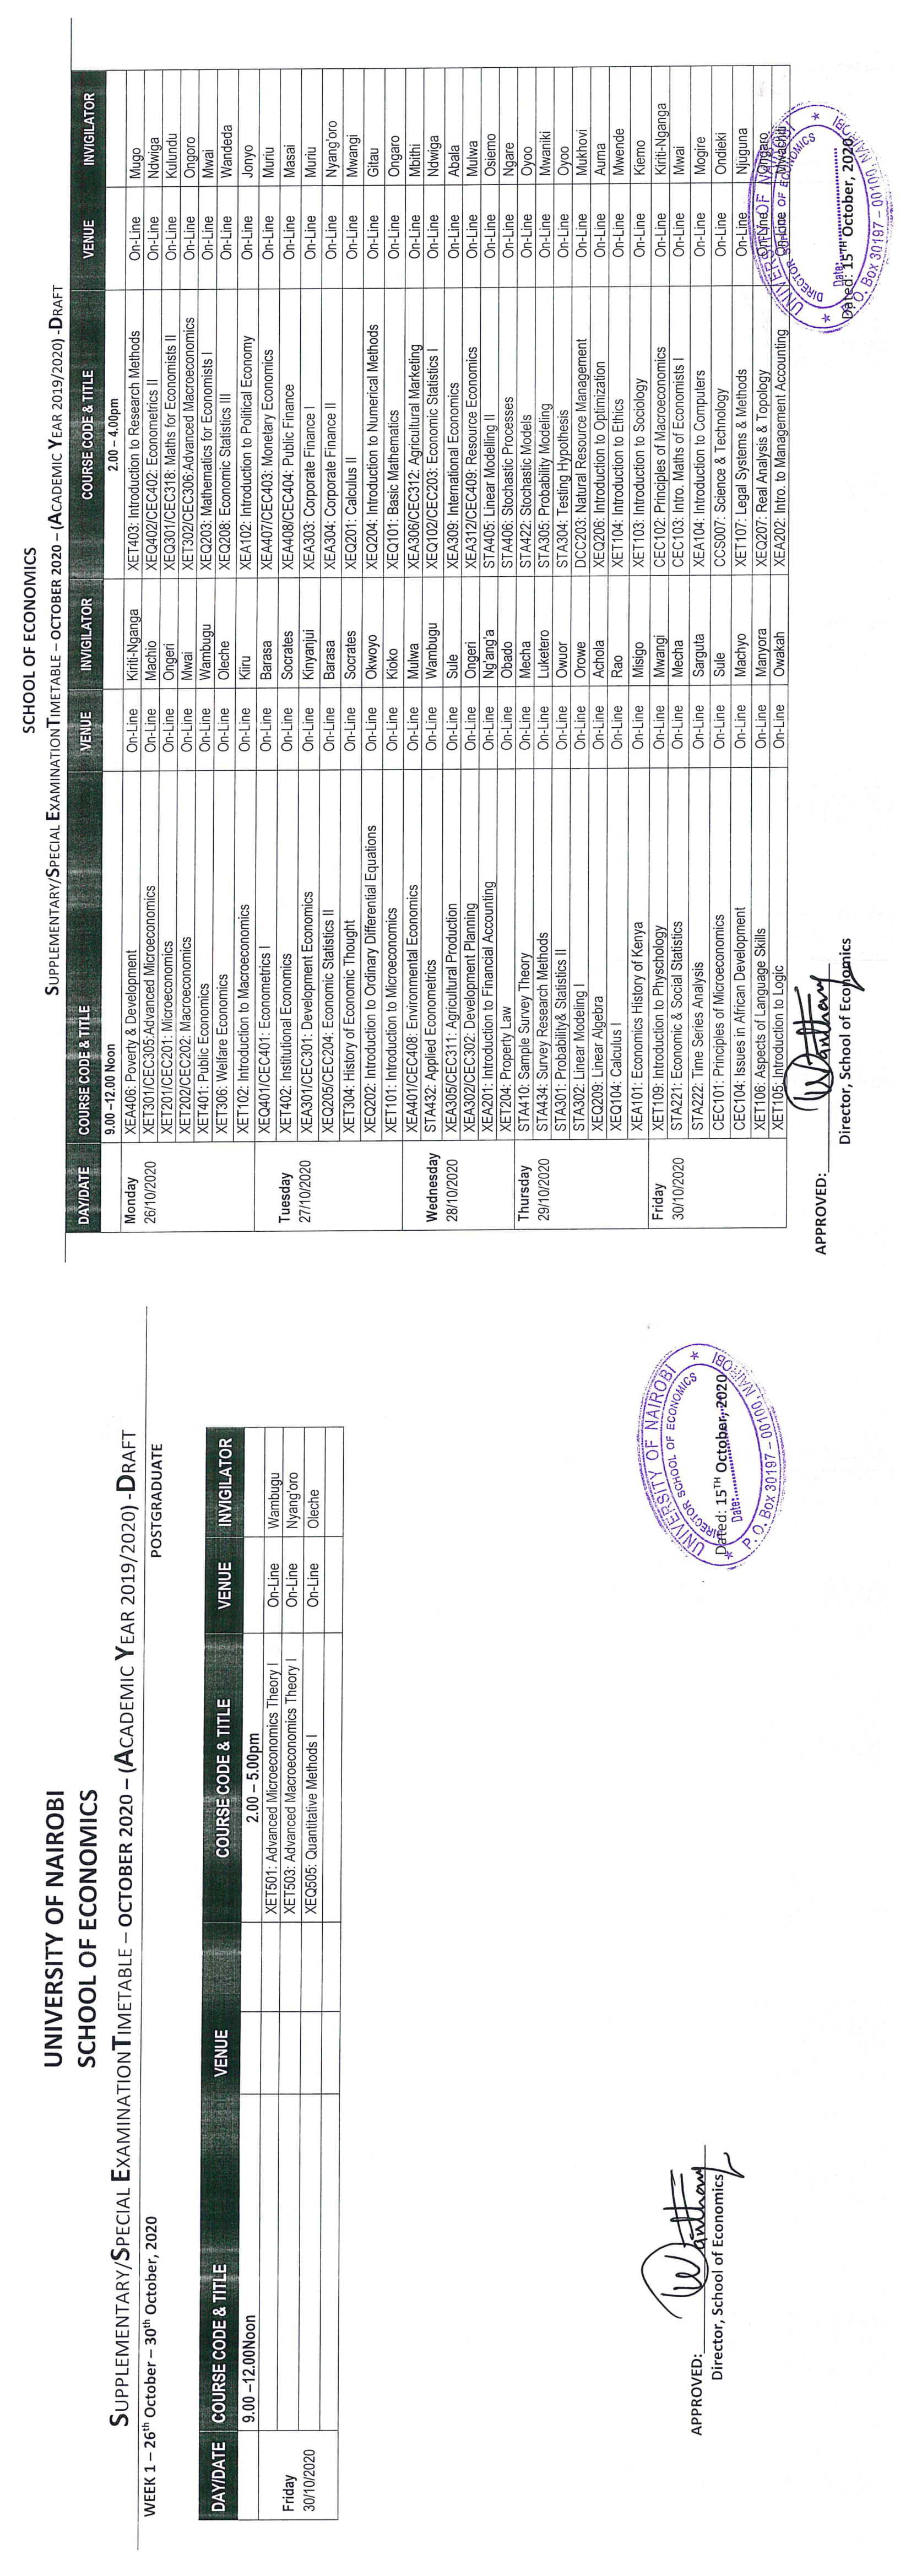 Supplementary and Special Exams Timetable